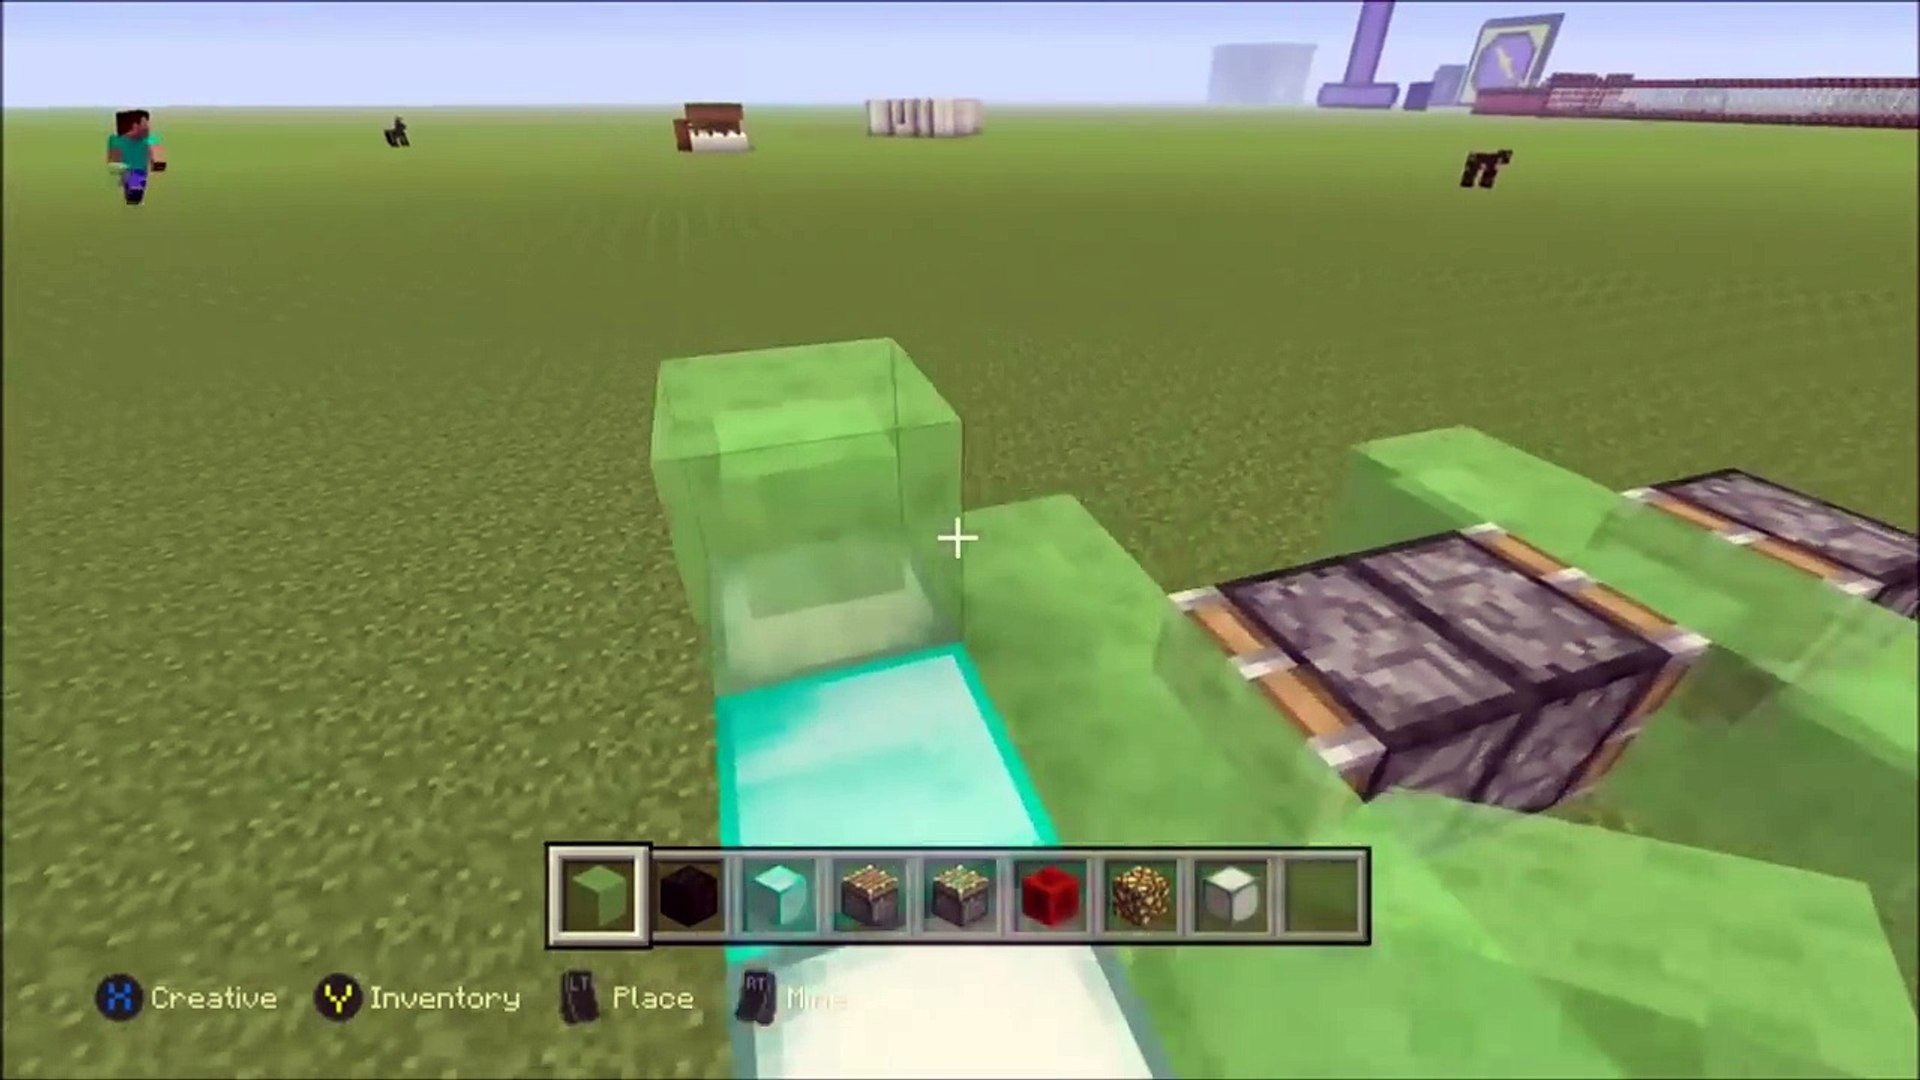 Minecraft PS3, PS4, Xbox, Wii U - WORKING CAR with SLIME BLOCKS! SLIME BLOCK  CAR! - Easy Tutorial!!! - Dailymotion Video